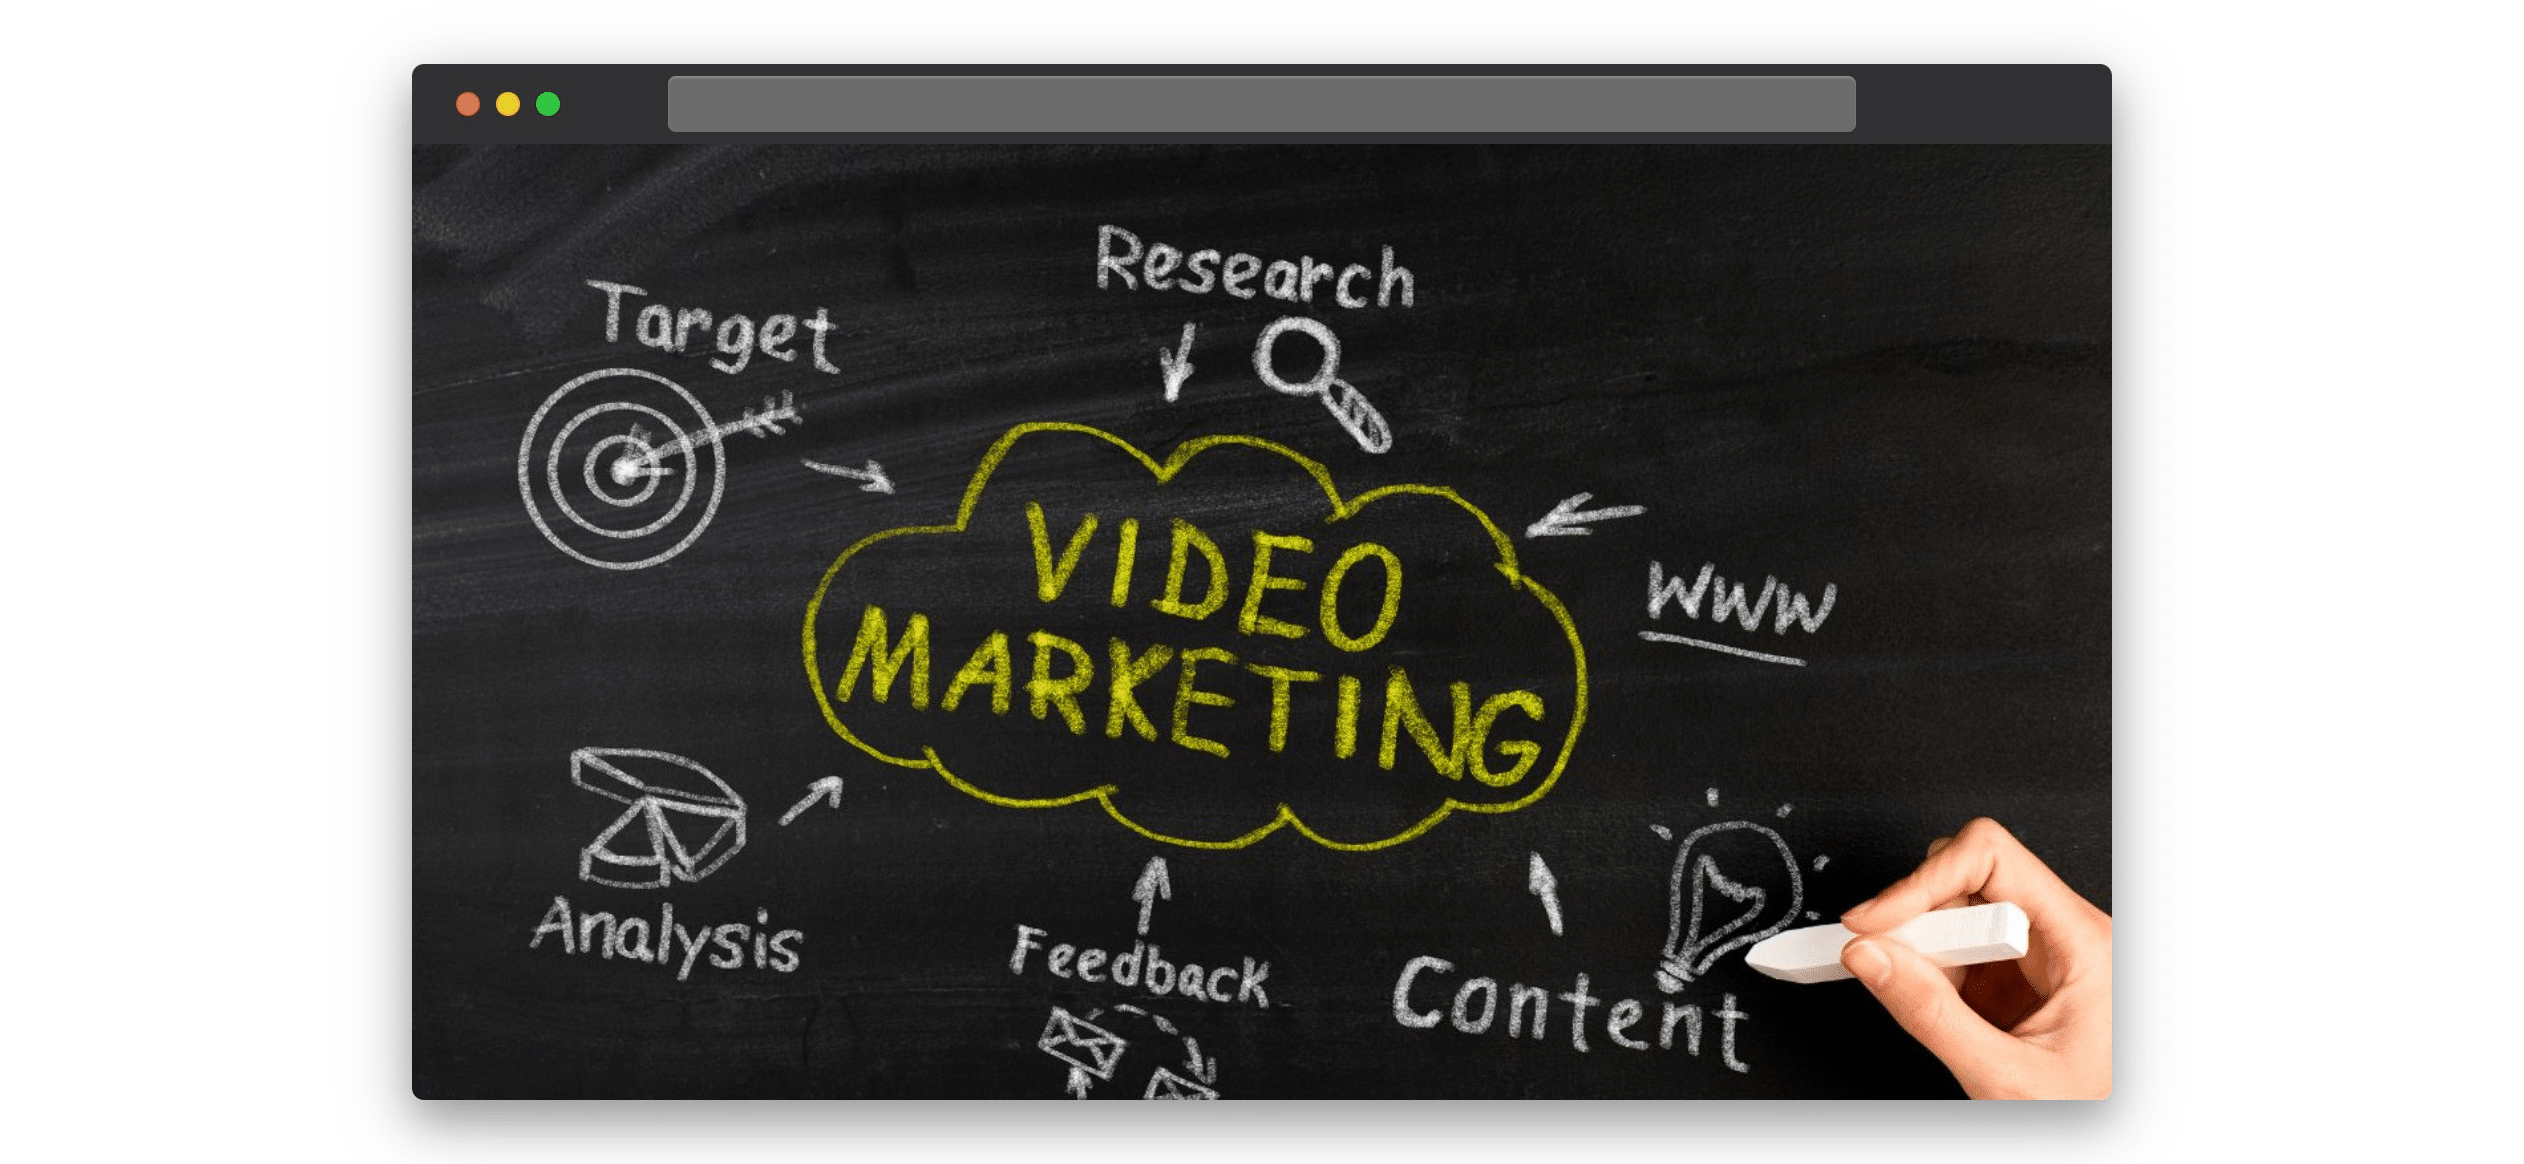 A mind-map for video marketing strategies